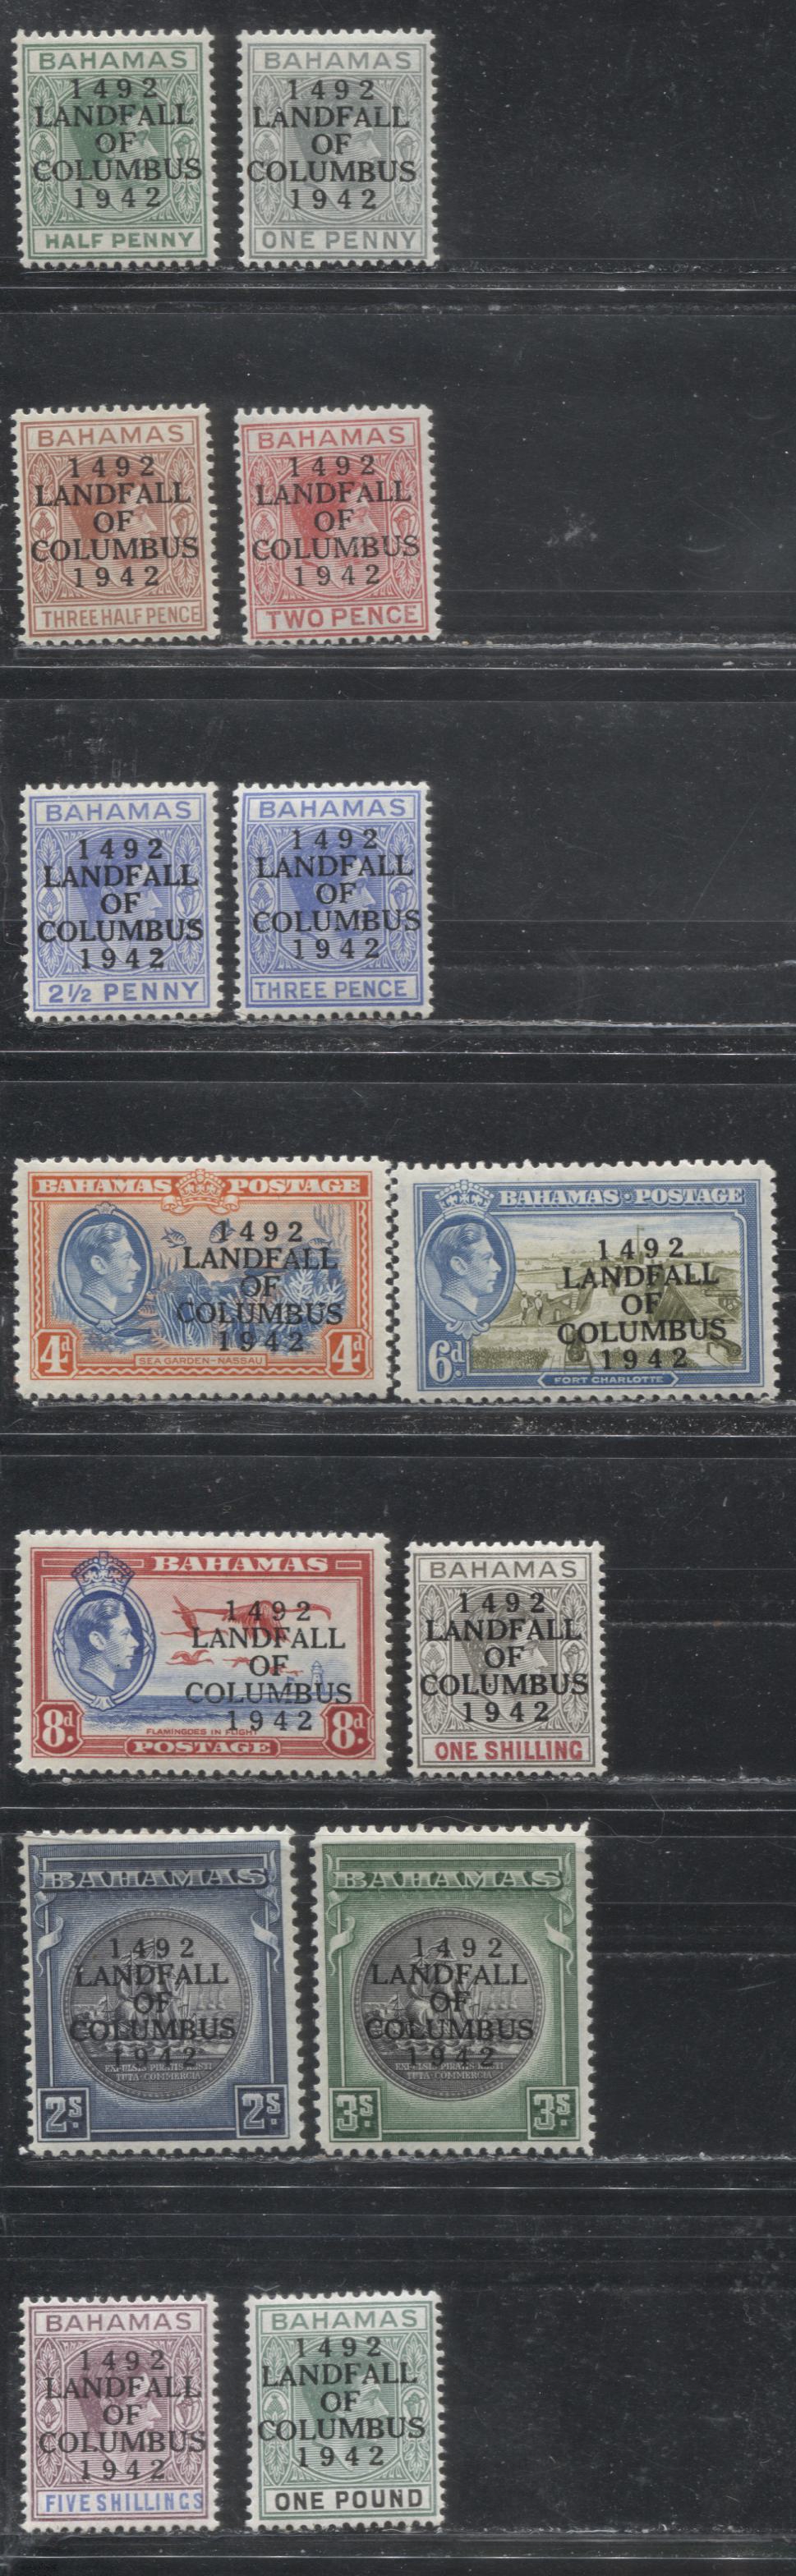 Bahamas SG#162-175 1942 450th Anniversary of the Landing of Columbus Issue, a VF LH Complete Set